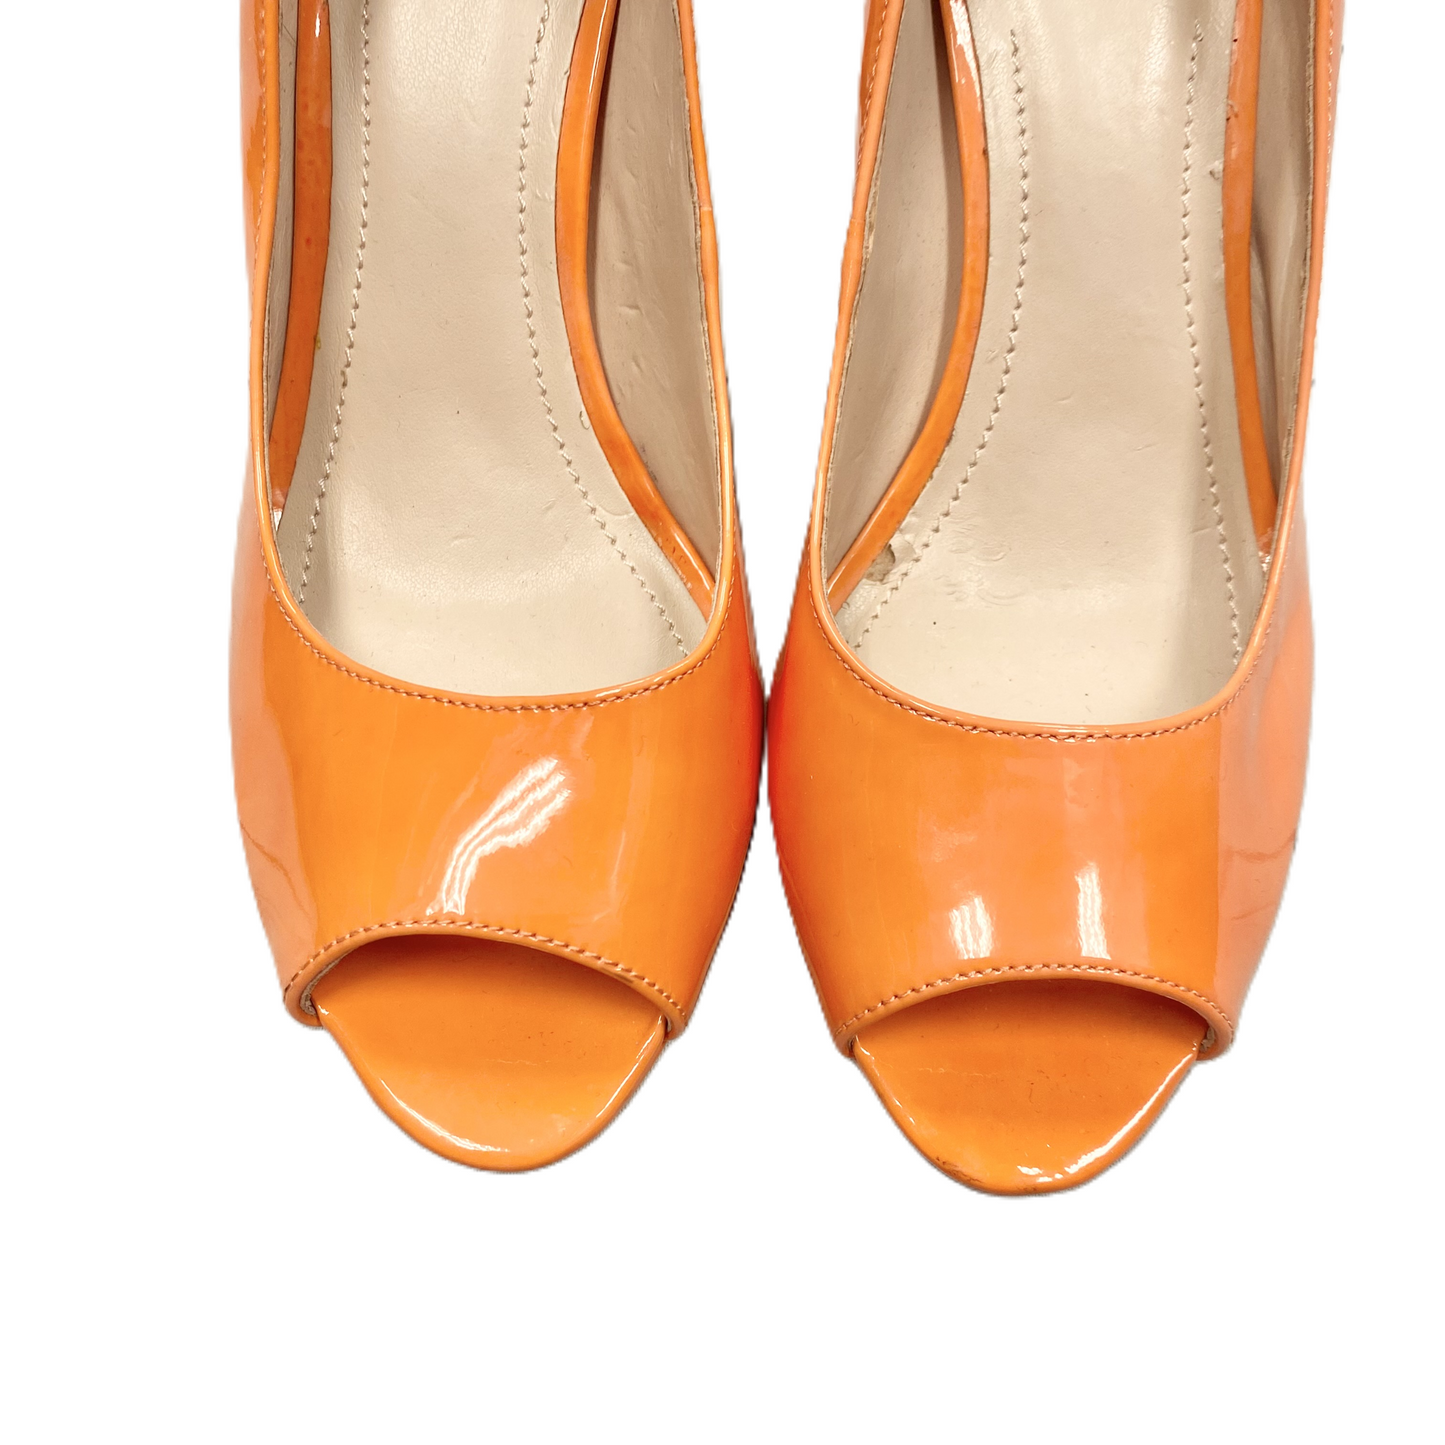 Orange Shoes Heels Stiletto By Vince Camuto, Size: 6.5